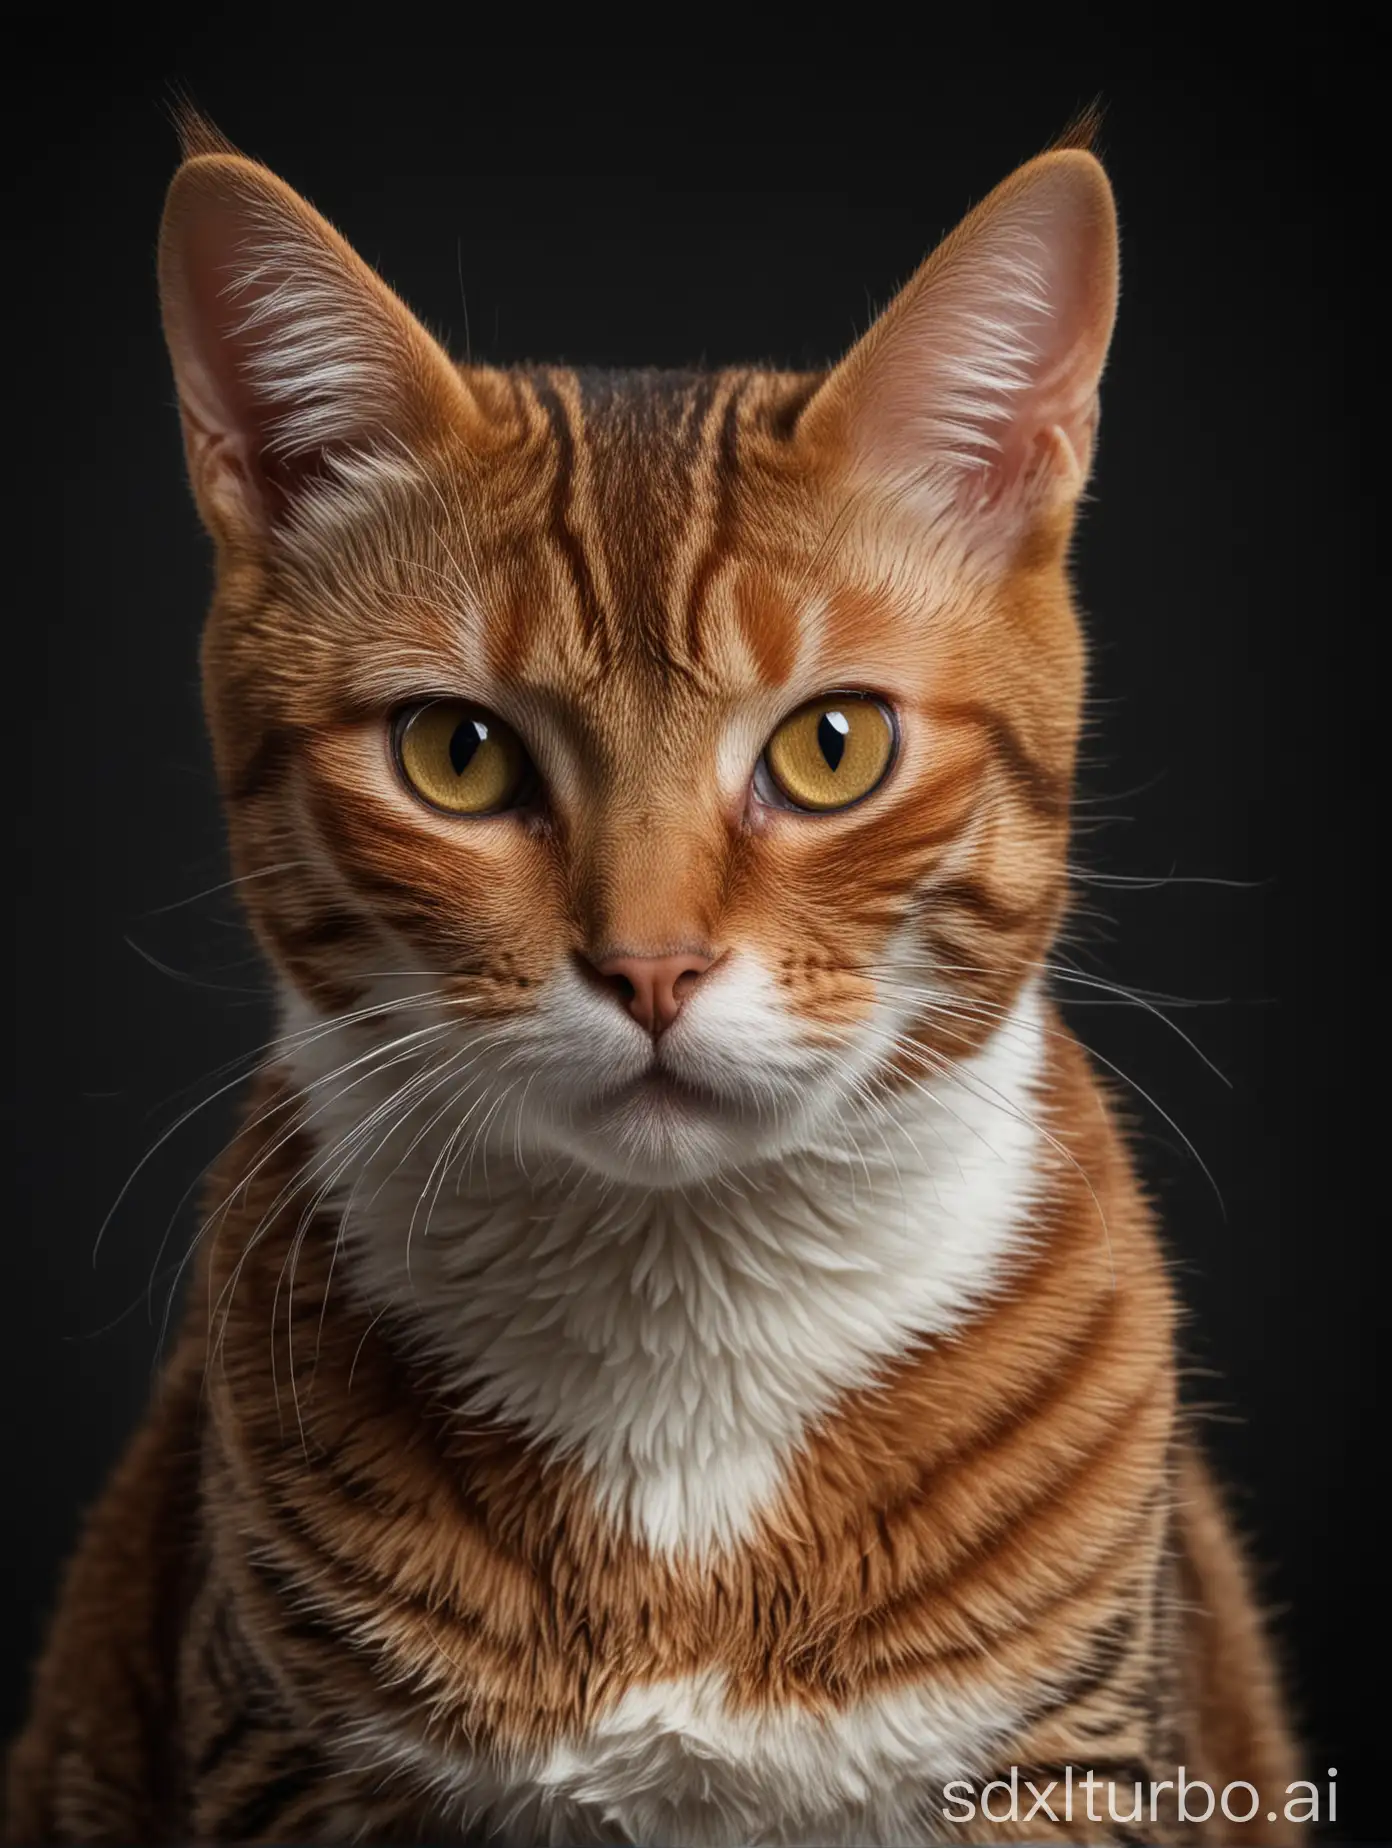 Portrait of a red-striped European short-hair cat, in a photo studio with dark background, very detailed, ultra-high resolution